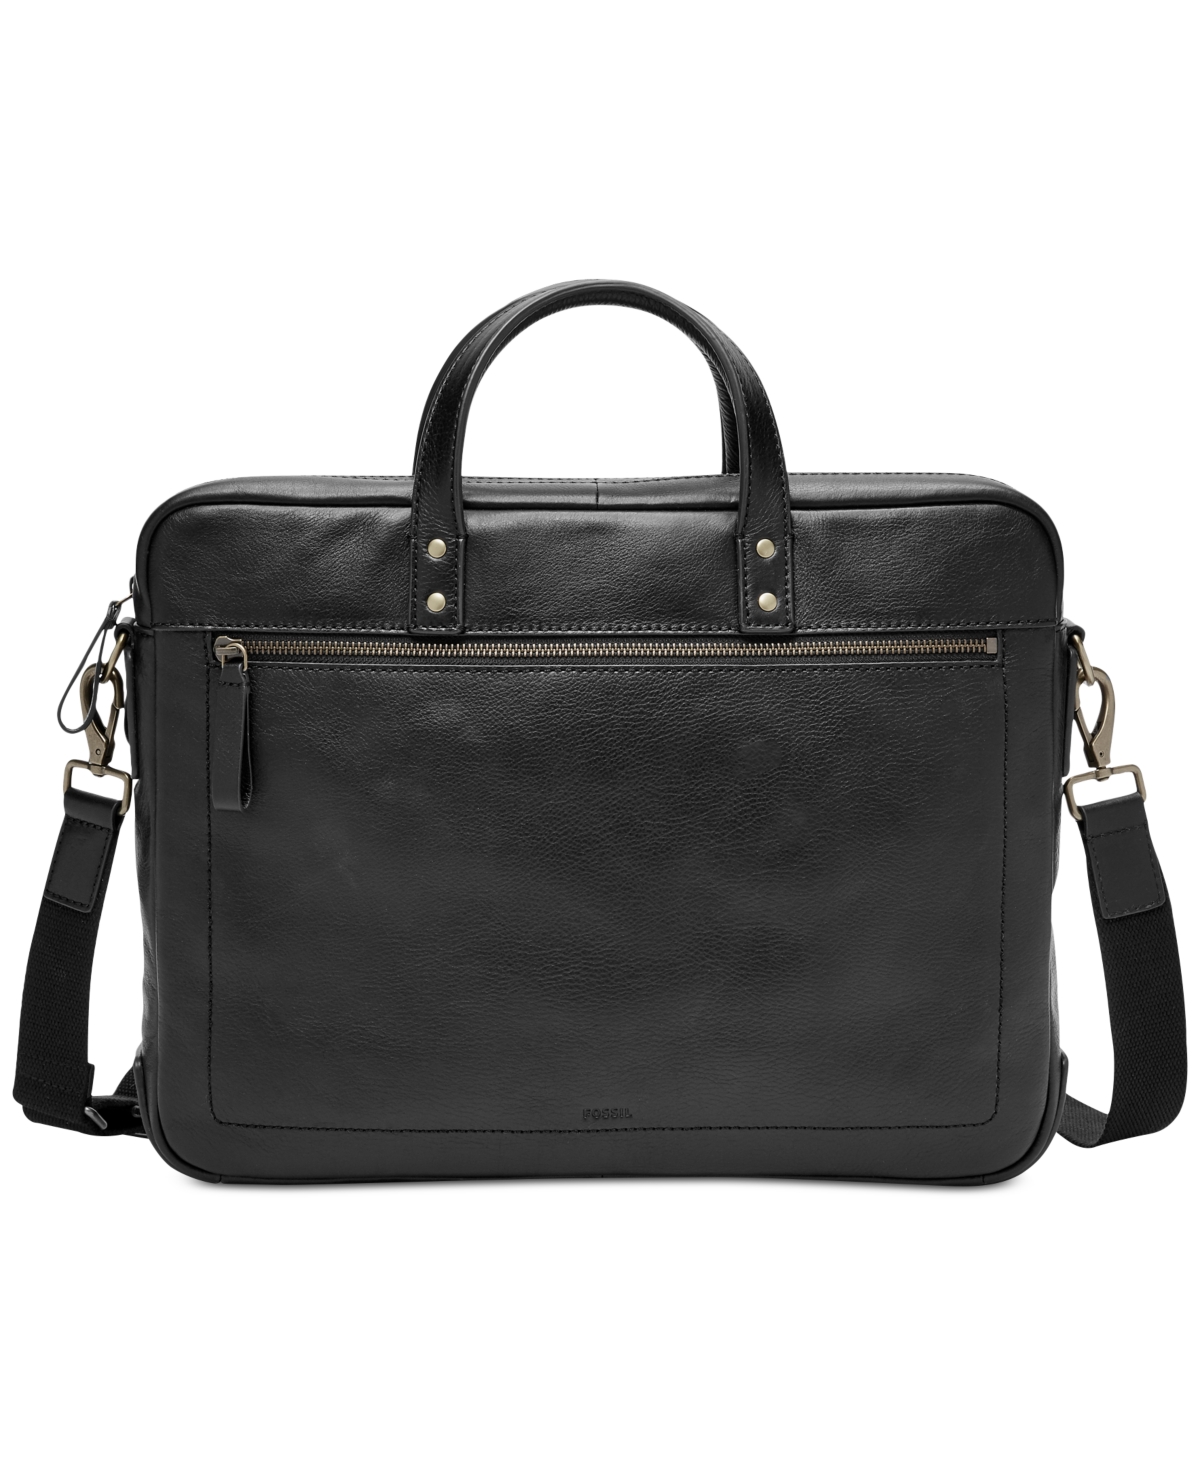 UPC 762346343530 product image for Fossil Men's Haskell Leather Briefcase | upcitemdb.com